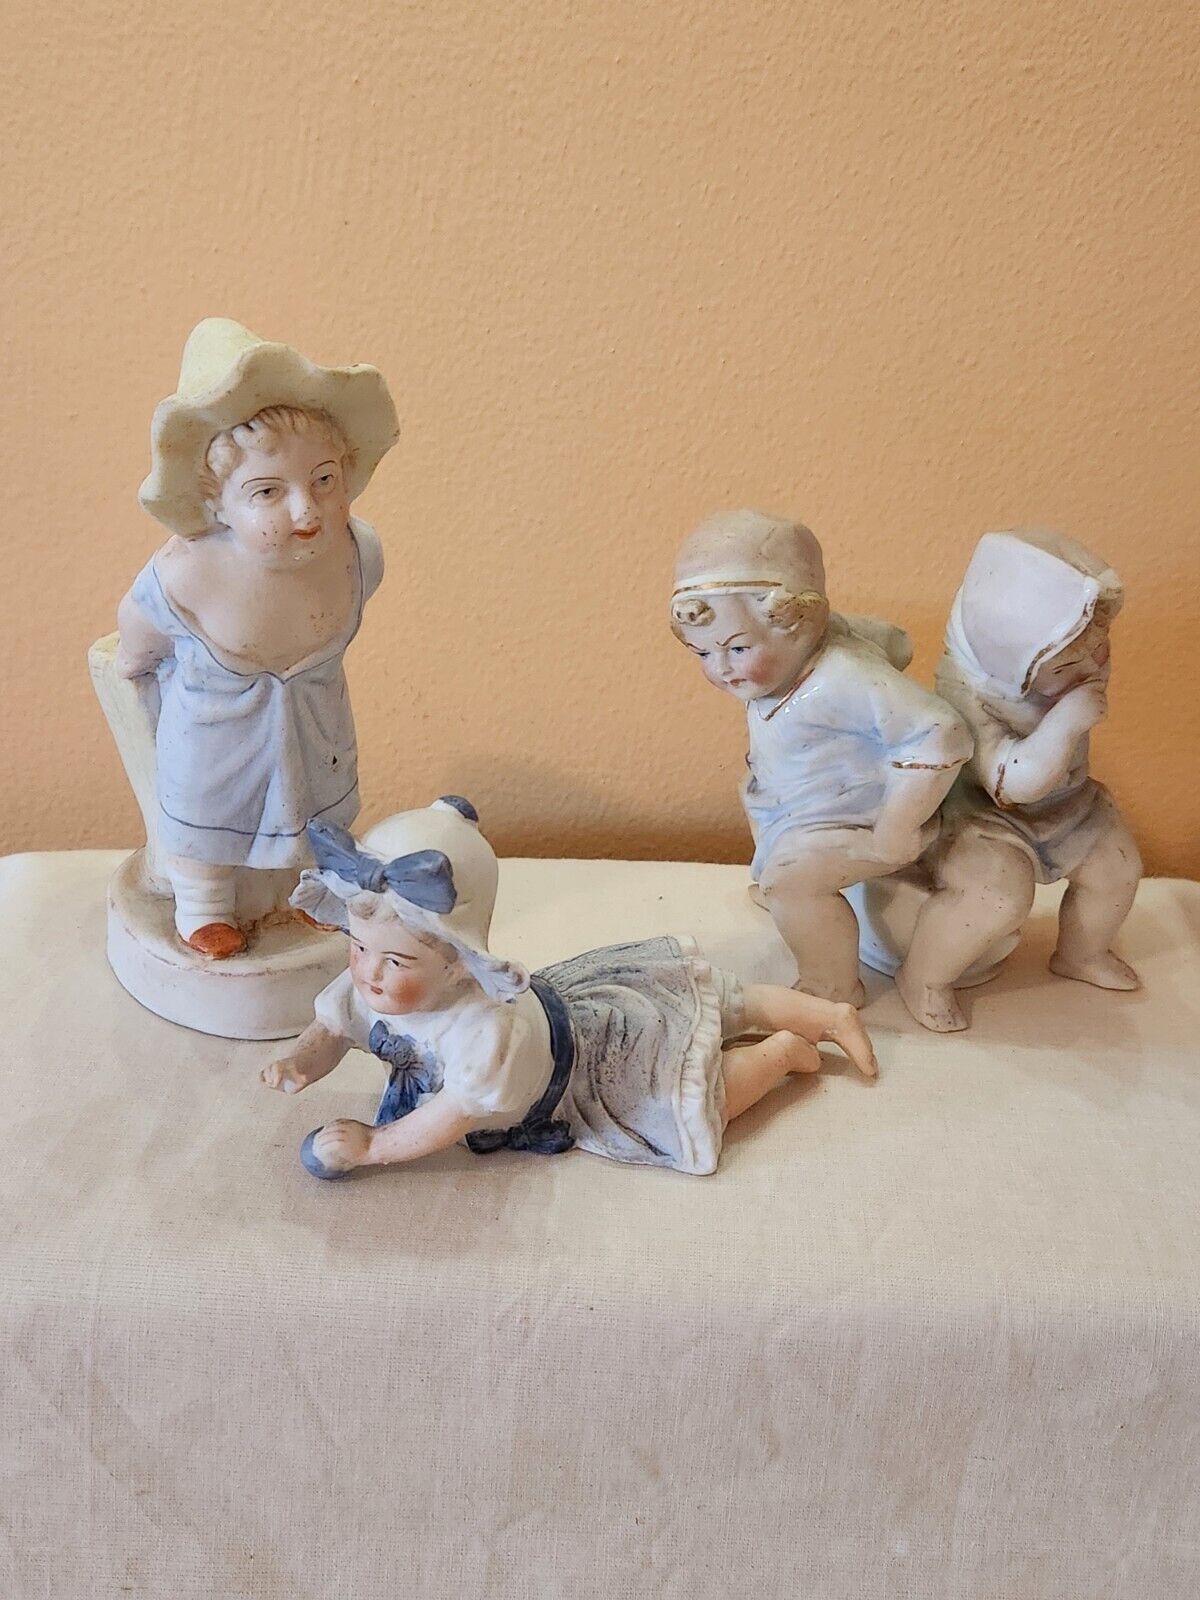 ANTIQUE BISQUE FIGURINES, MATCH/TOOTHPICK,  GIRL, 2 KIDS ON POTTY?? *AS FOUND*